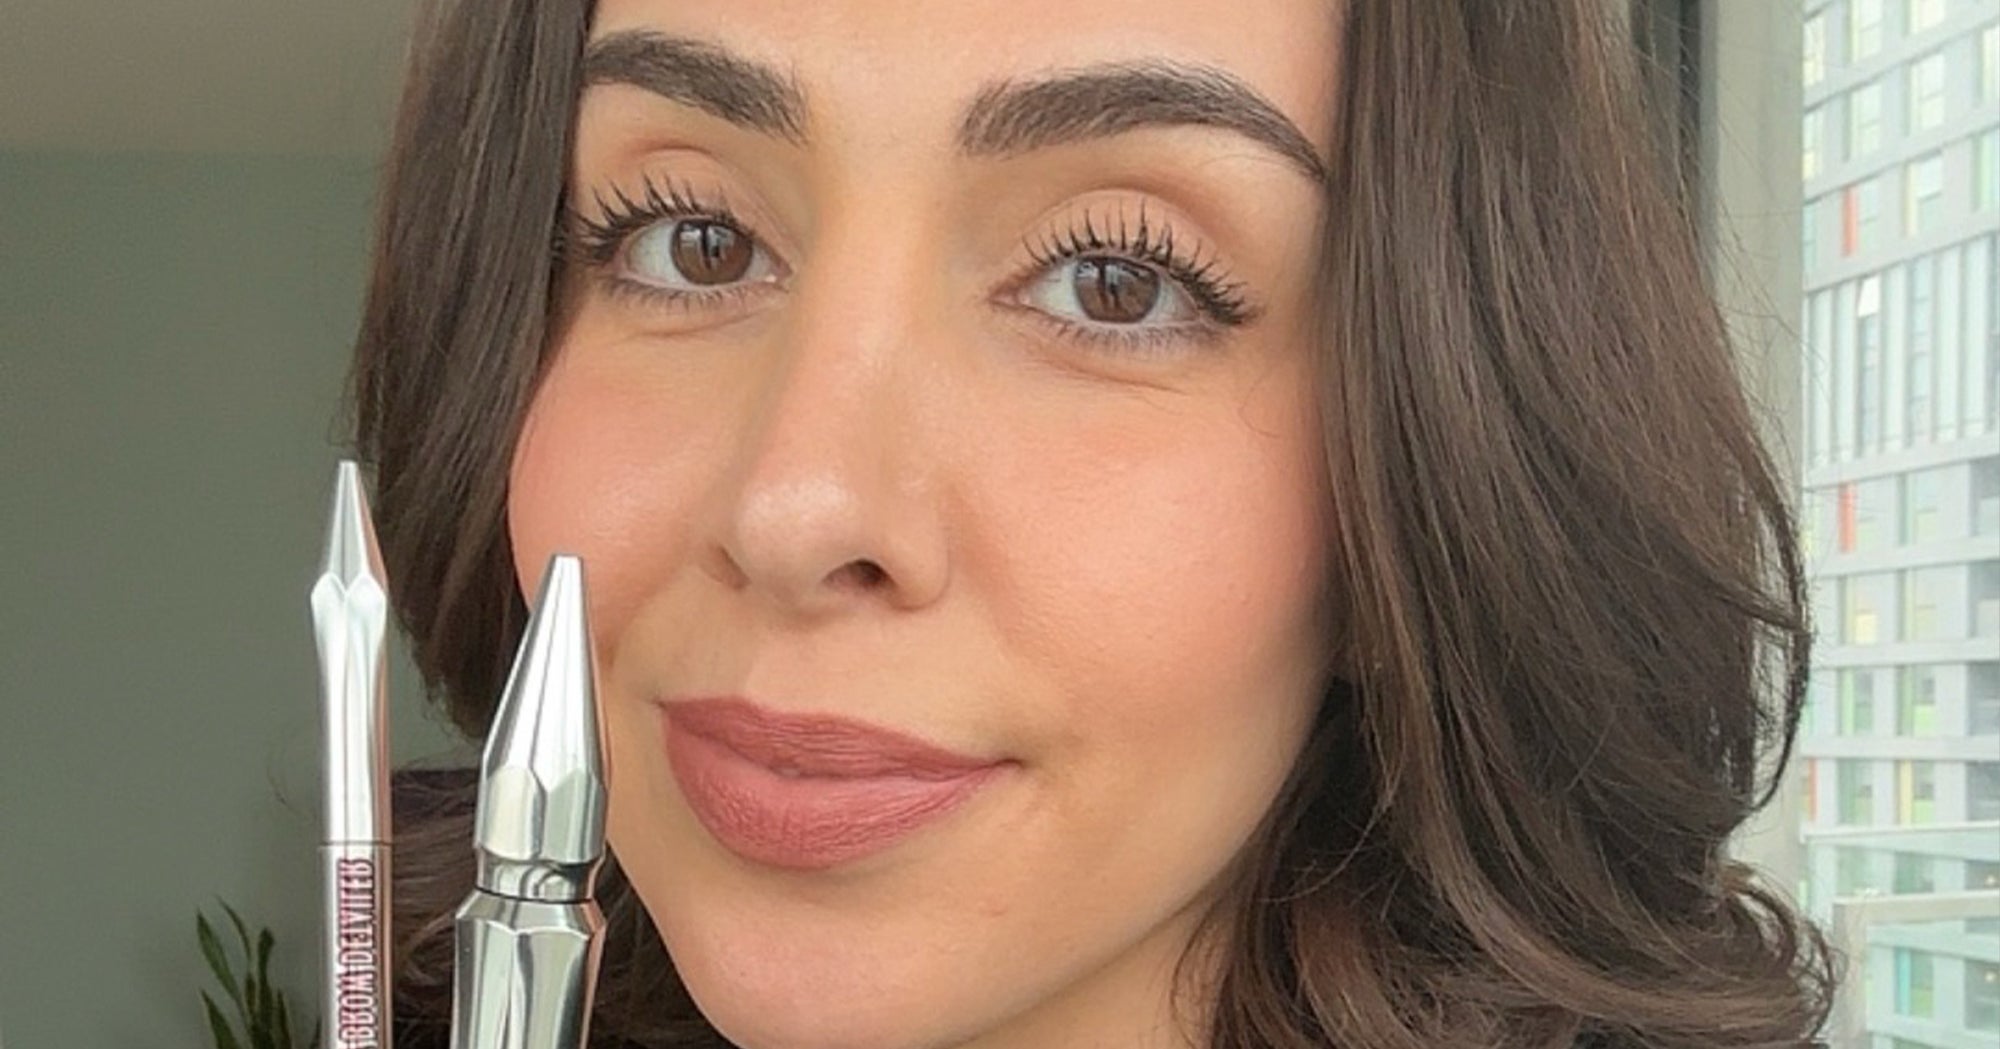 We Tried The Thinnest Brow Pencil Ever Made & The Hype Is Real